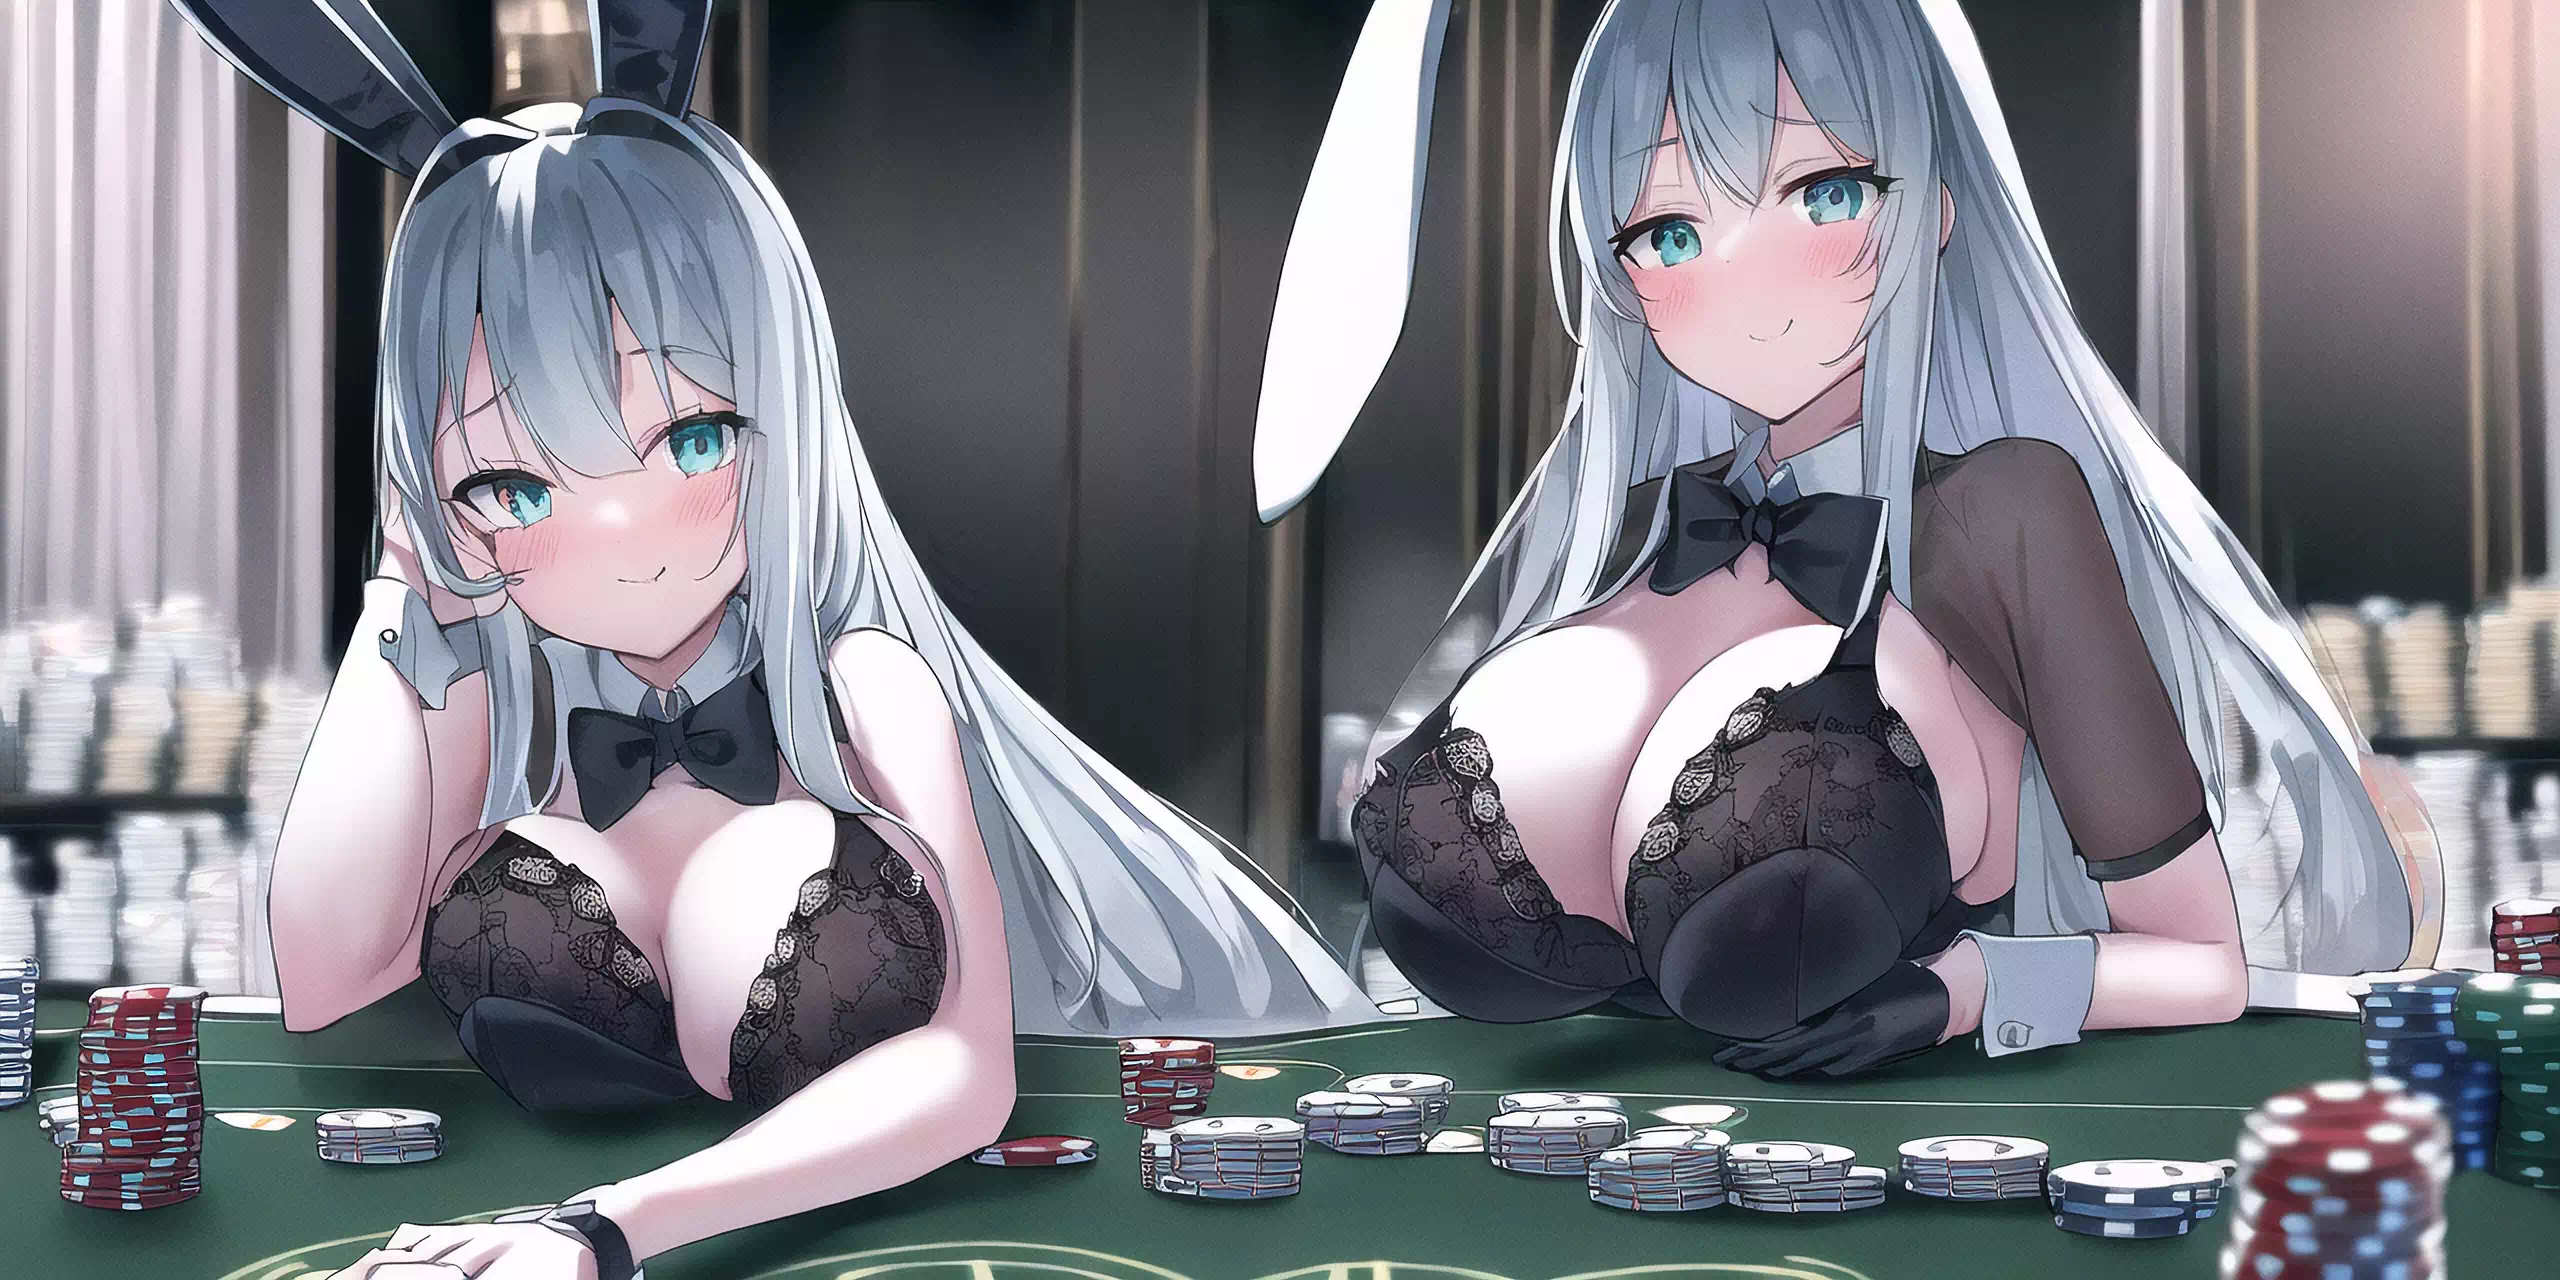 A gamble with Bunny